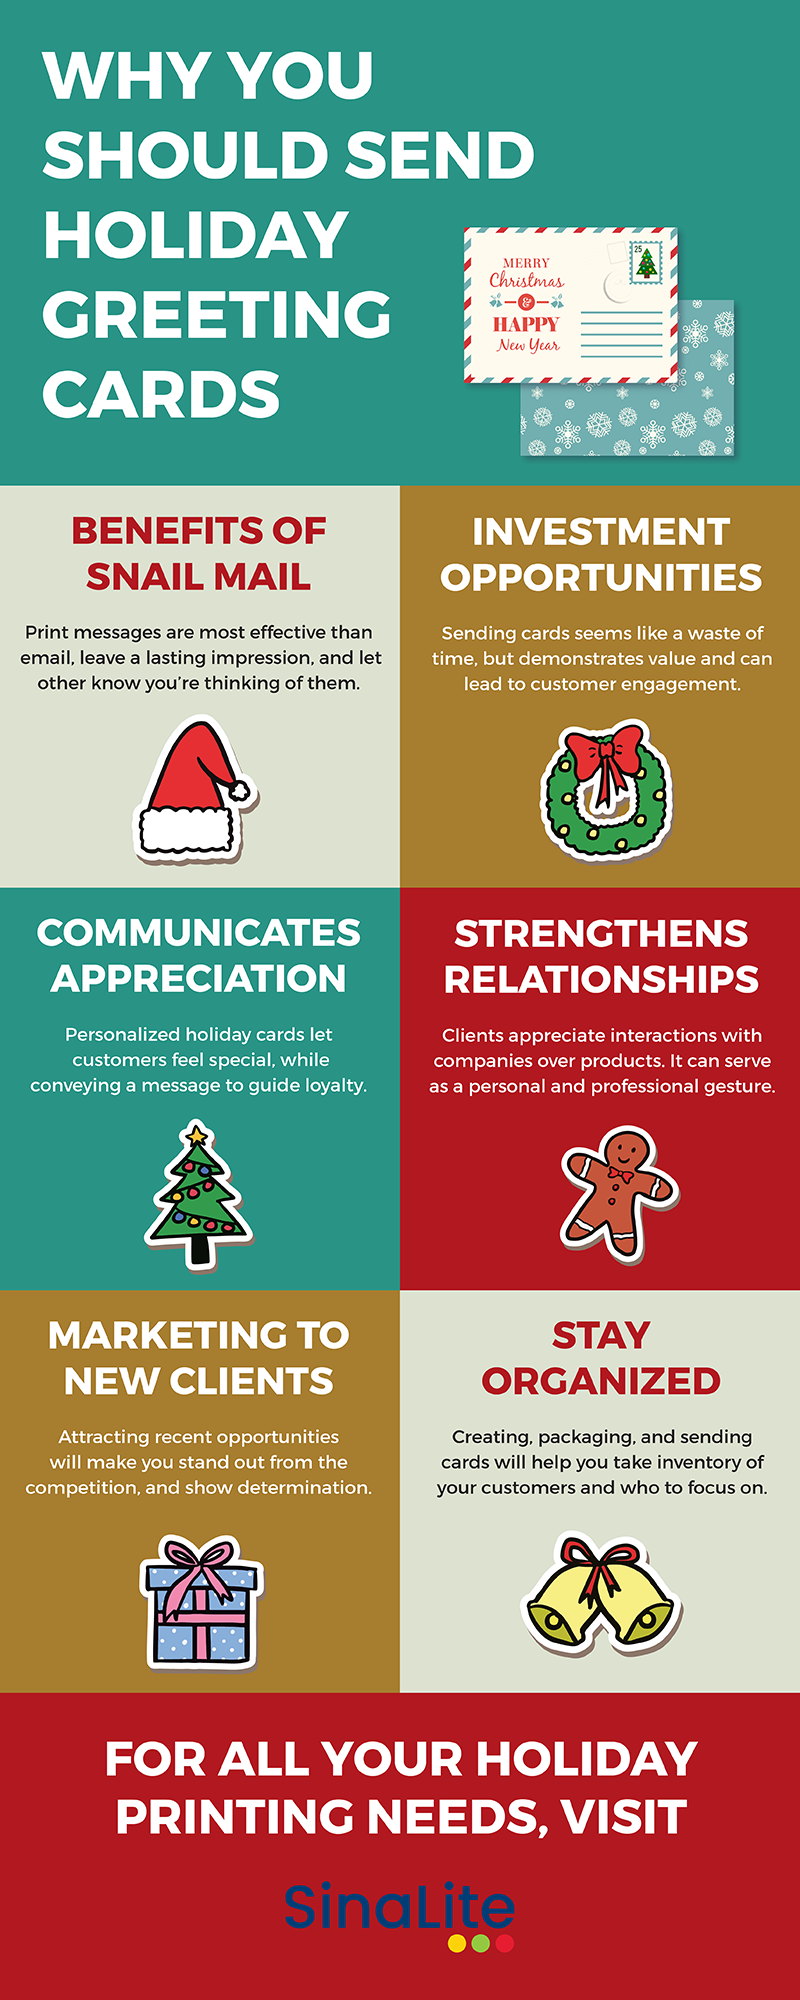 Why You Should Send Holiday Greeting Cards #infographic